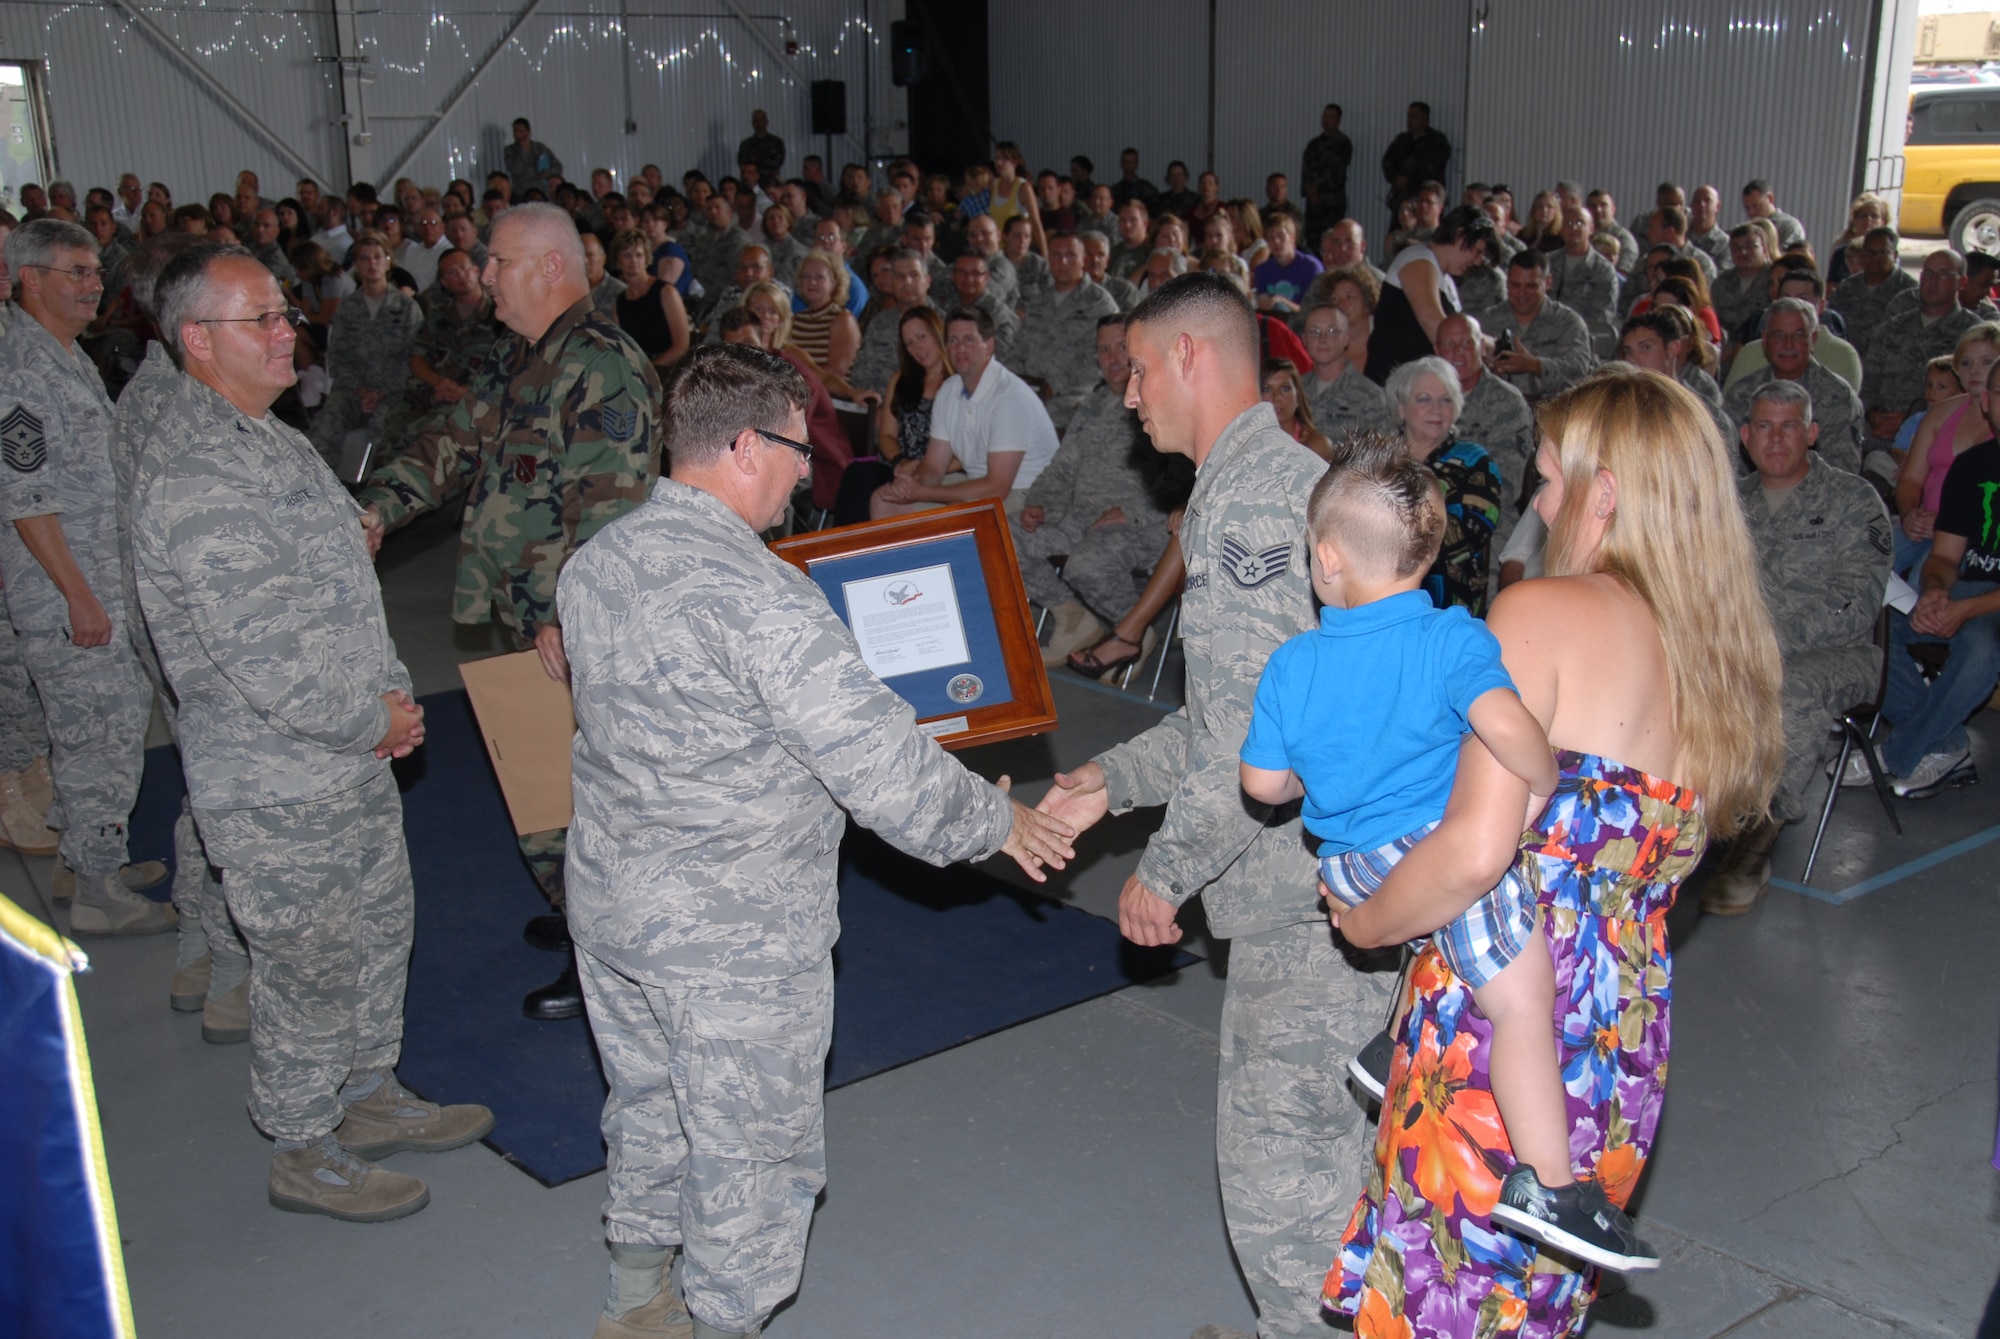 A "Welcome Home Hero Salute" held on July 18 at Selfridge Air National Guard Base included airmen of the 127th Aircraft Maintenance Squadron, the 127th Maintenance Squadron, the 127th Maintenance Group, The 127th Maintenance Operations Flight, the 127th Civil Engineer Squadron, and the 127th Medical Group.  The event commemorated 127th Wing Citizen-Airmen for their service while deployed for more than 30 consecutive days for Operations Noble Eagle, Enduring Freedom and Iraqi Freedom and all other contingency operations.  Photo by MSgt. Clancey Pence, 127th Public Affairs
